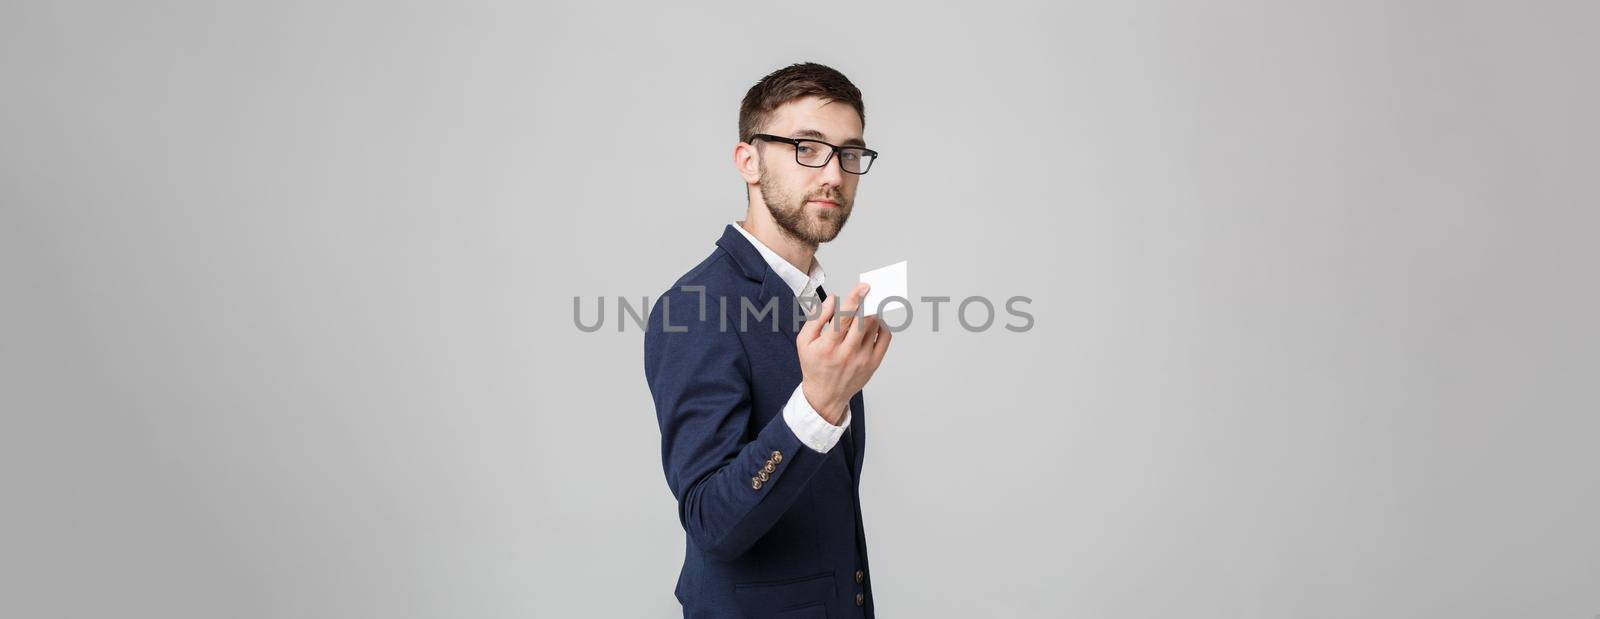 Business Concept - Portrait Handsome Business man showing name card with smiling confident face. White Background.Copy Space.